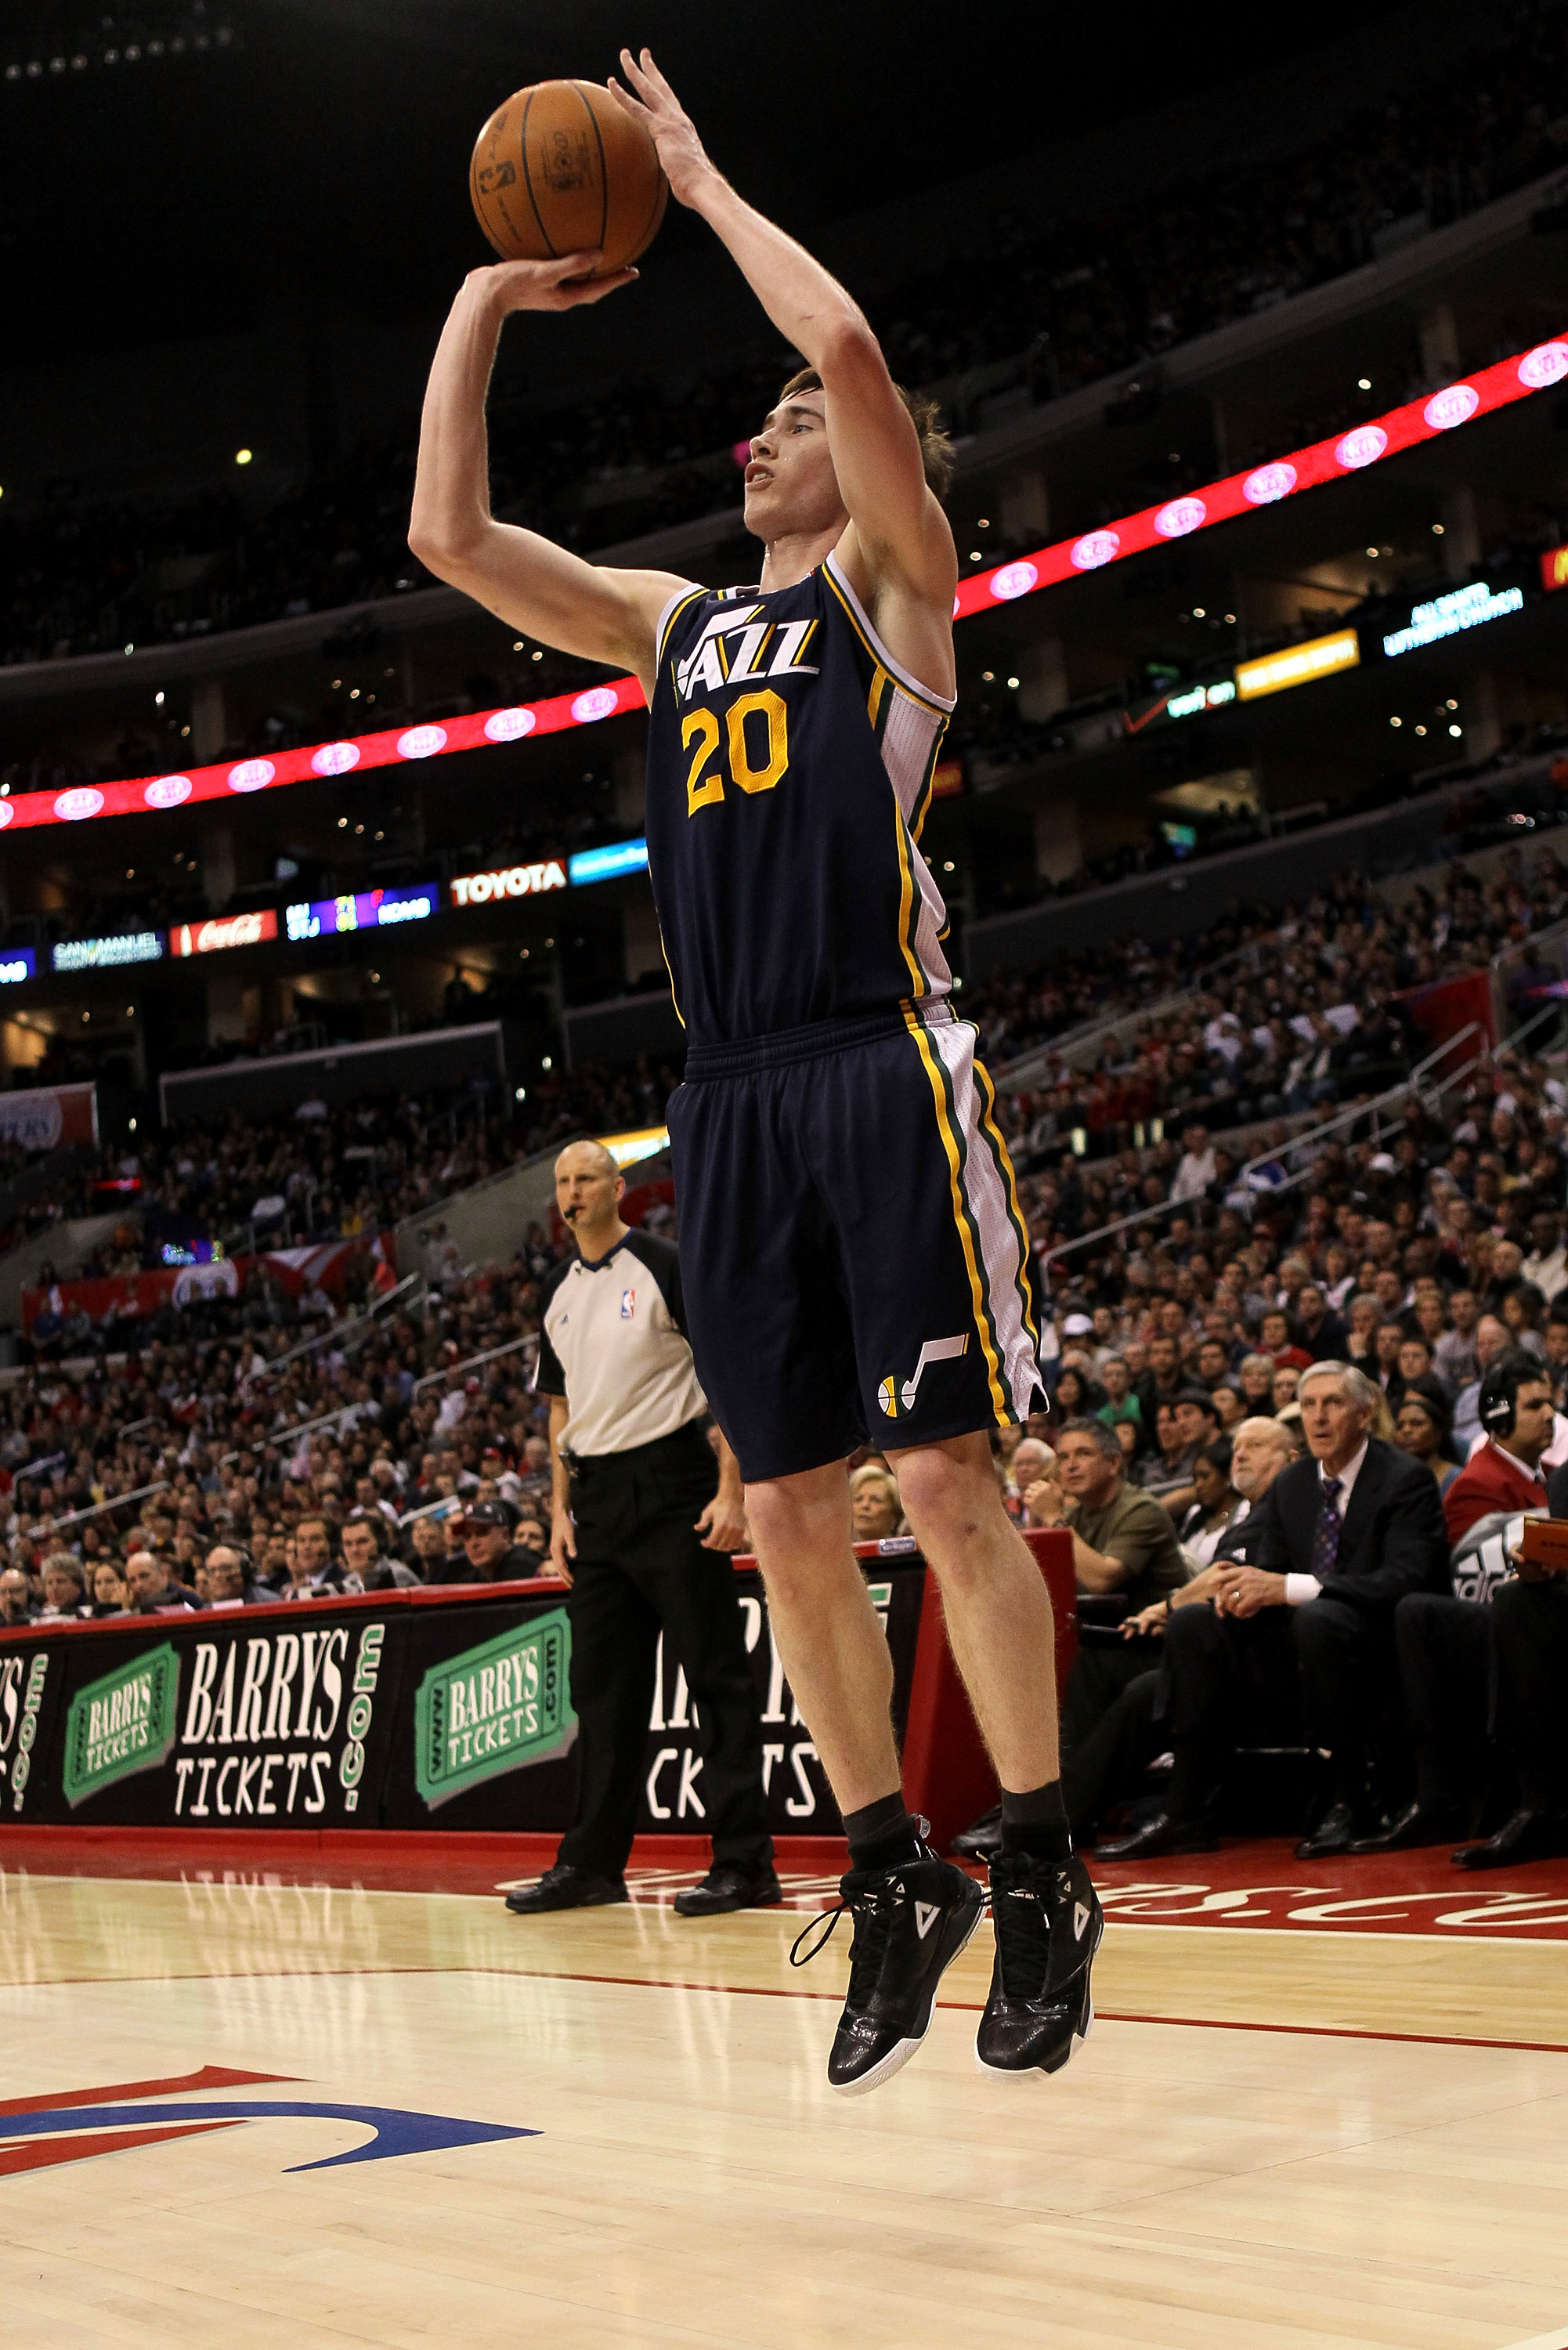 LOS ANGELES, CA - DECEMBER 29:  Gordon Hayward #20 of the Utah Jazz shoots against the Los Angeles Clippers at Staples Center on December 29, 2010 in Los Angeles, California.   The Jazz won 103-85.  NOTE TO USER: User expressly acknowledges and agrees tha